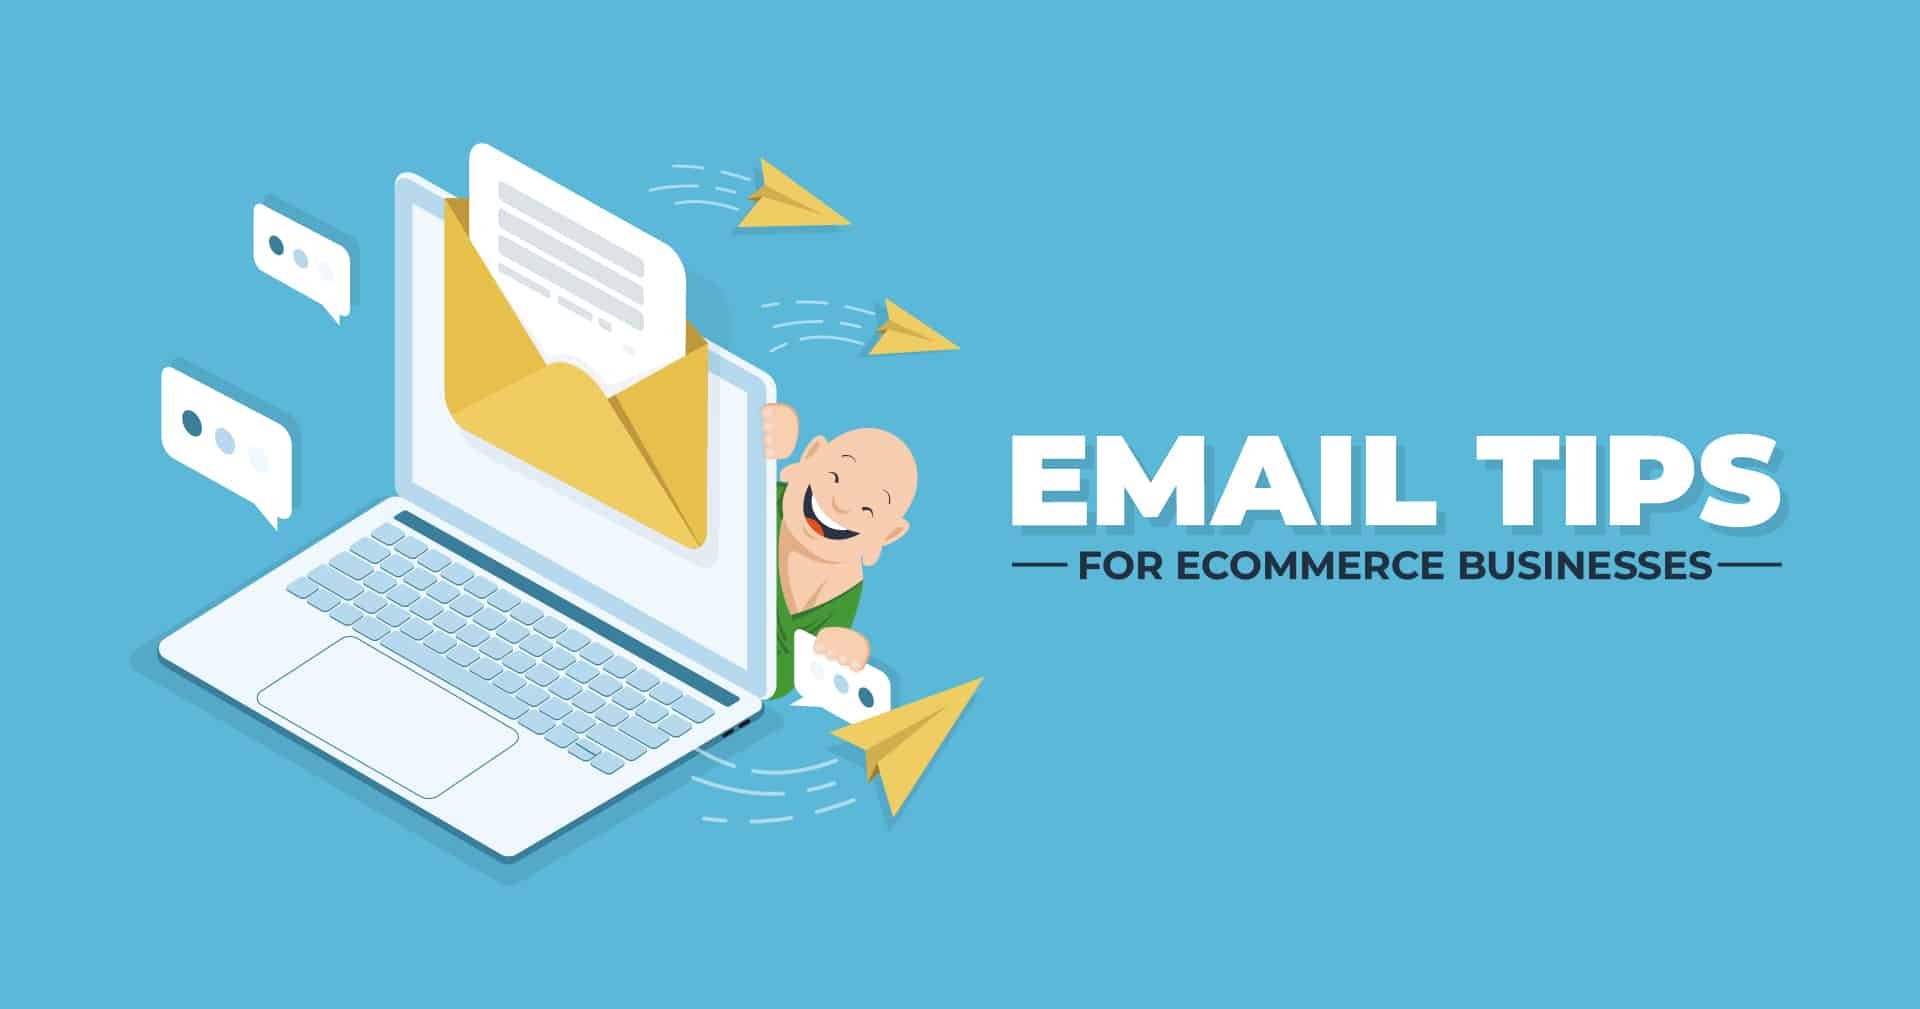 Email Tips for Ecommerce Businesses